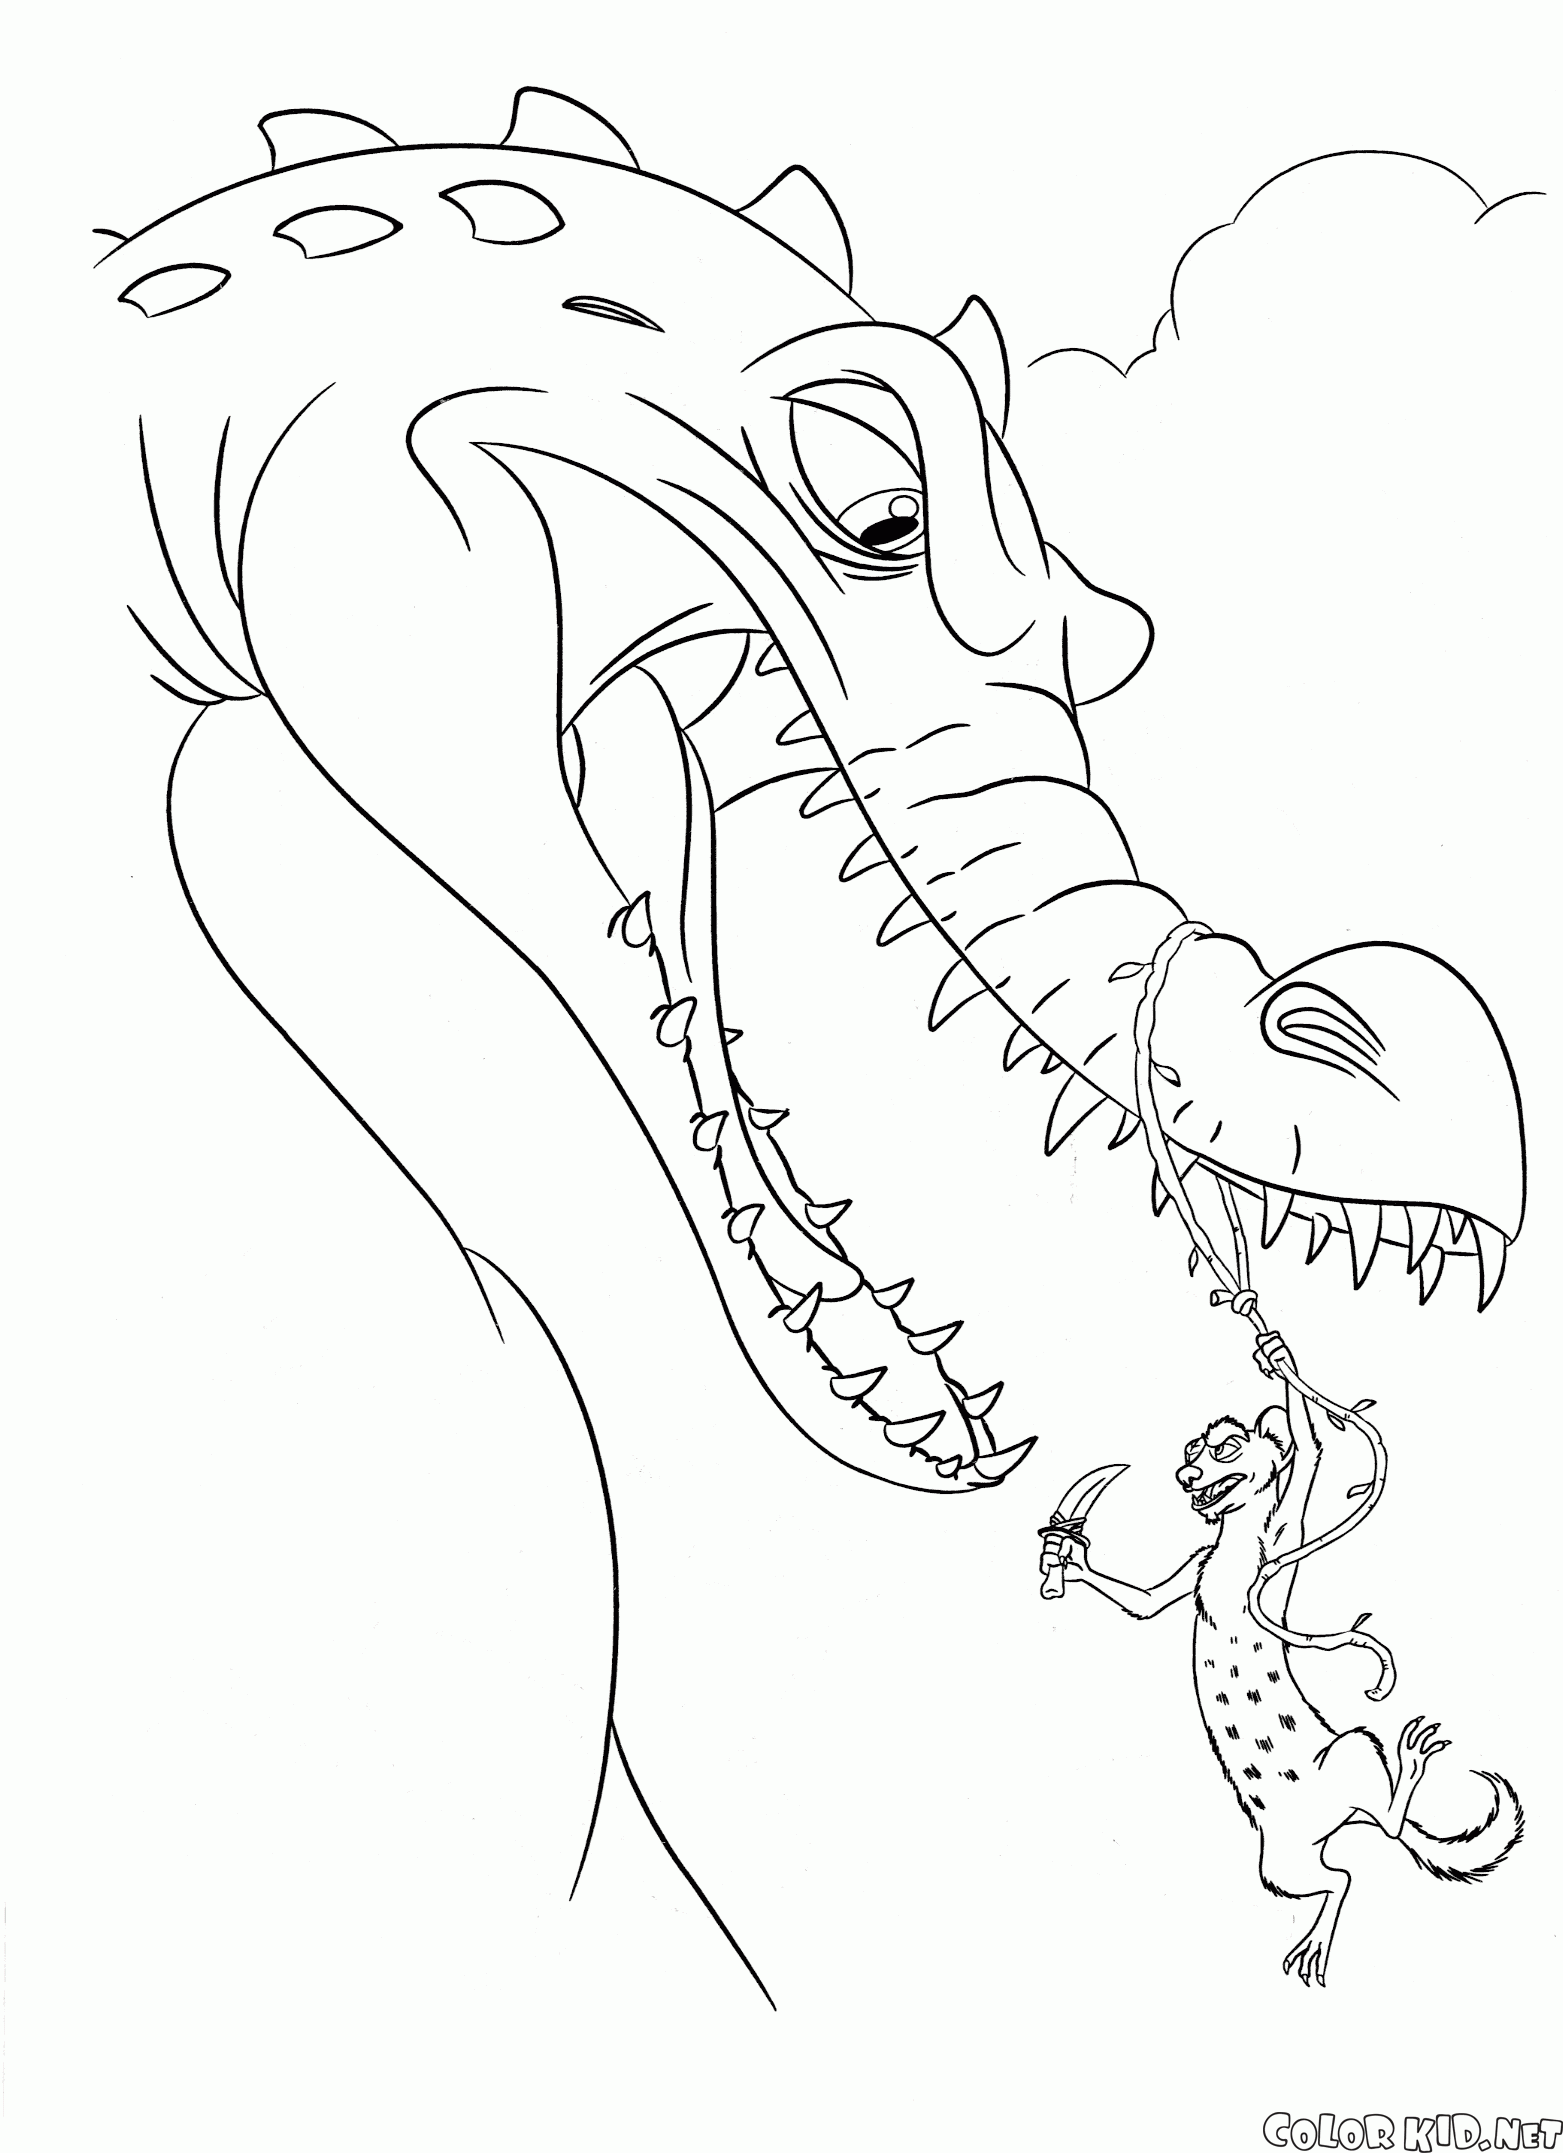 ice age 3 rudy coloring pages - photo #2